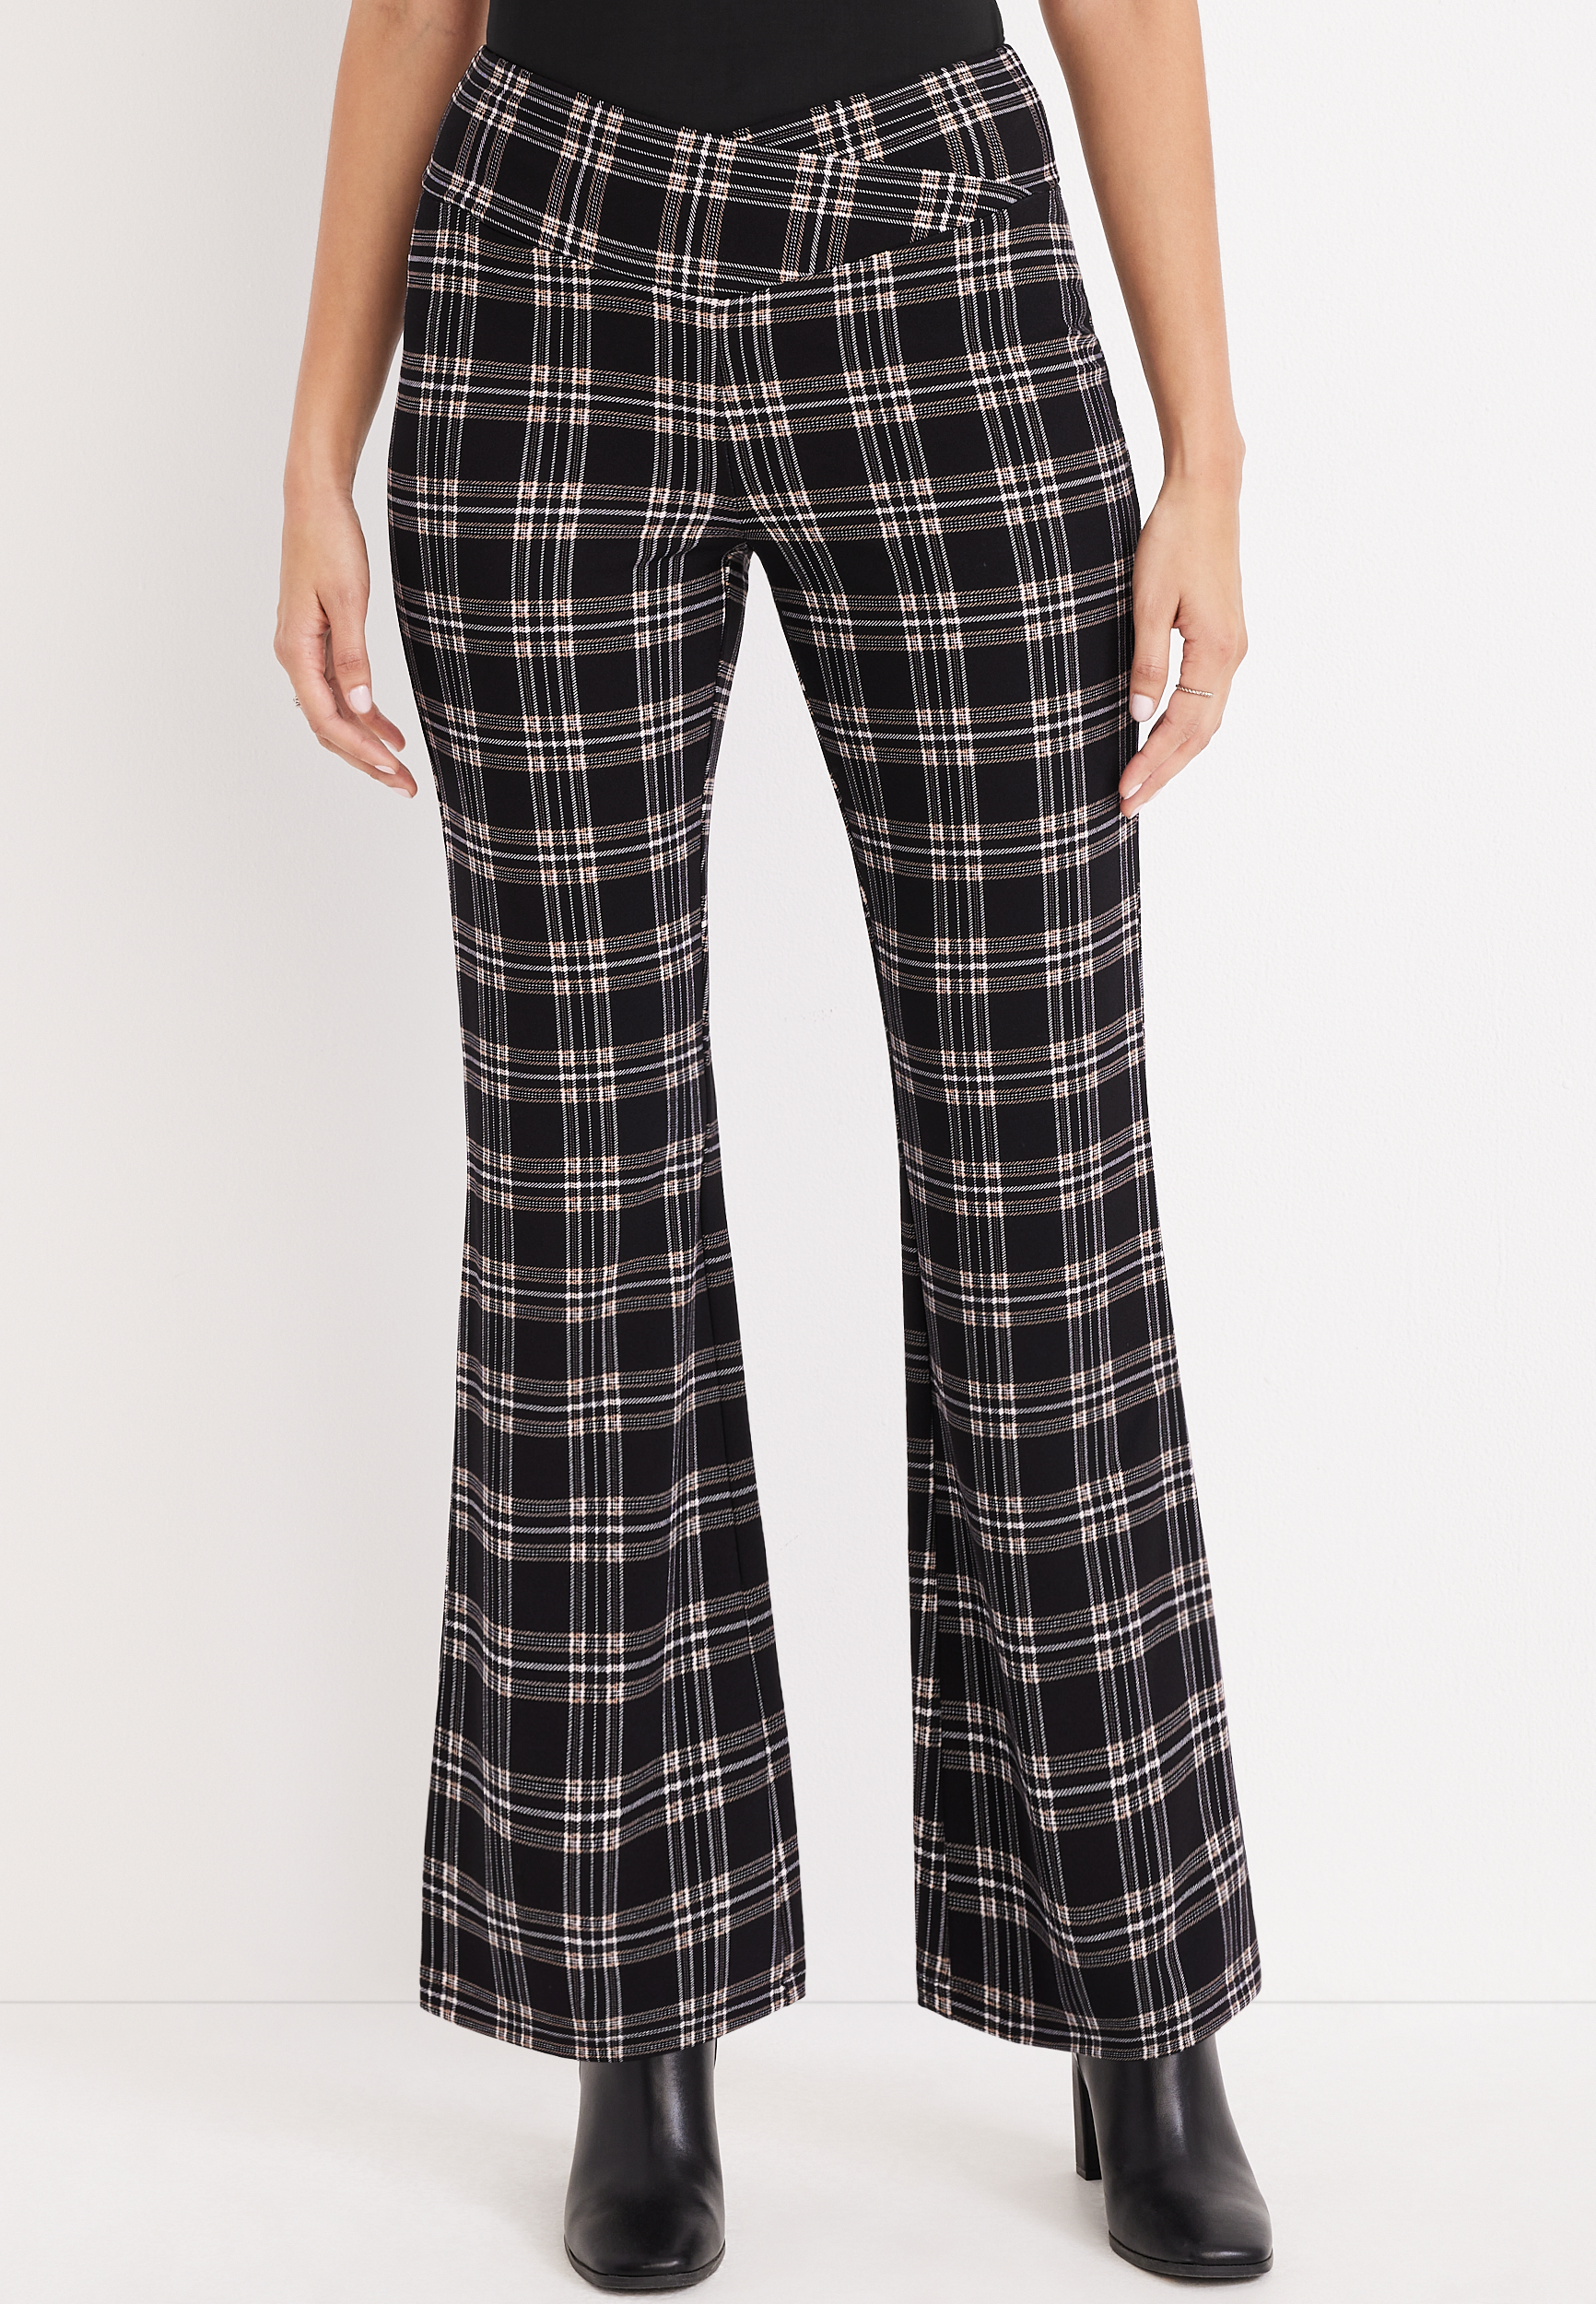 Black Plaid Ever Go Flare Crossover Waist Pant | maurices